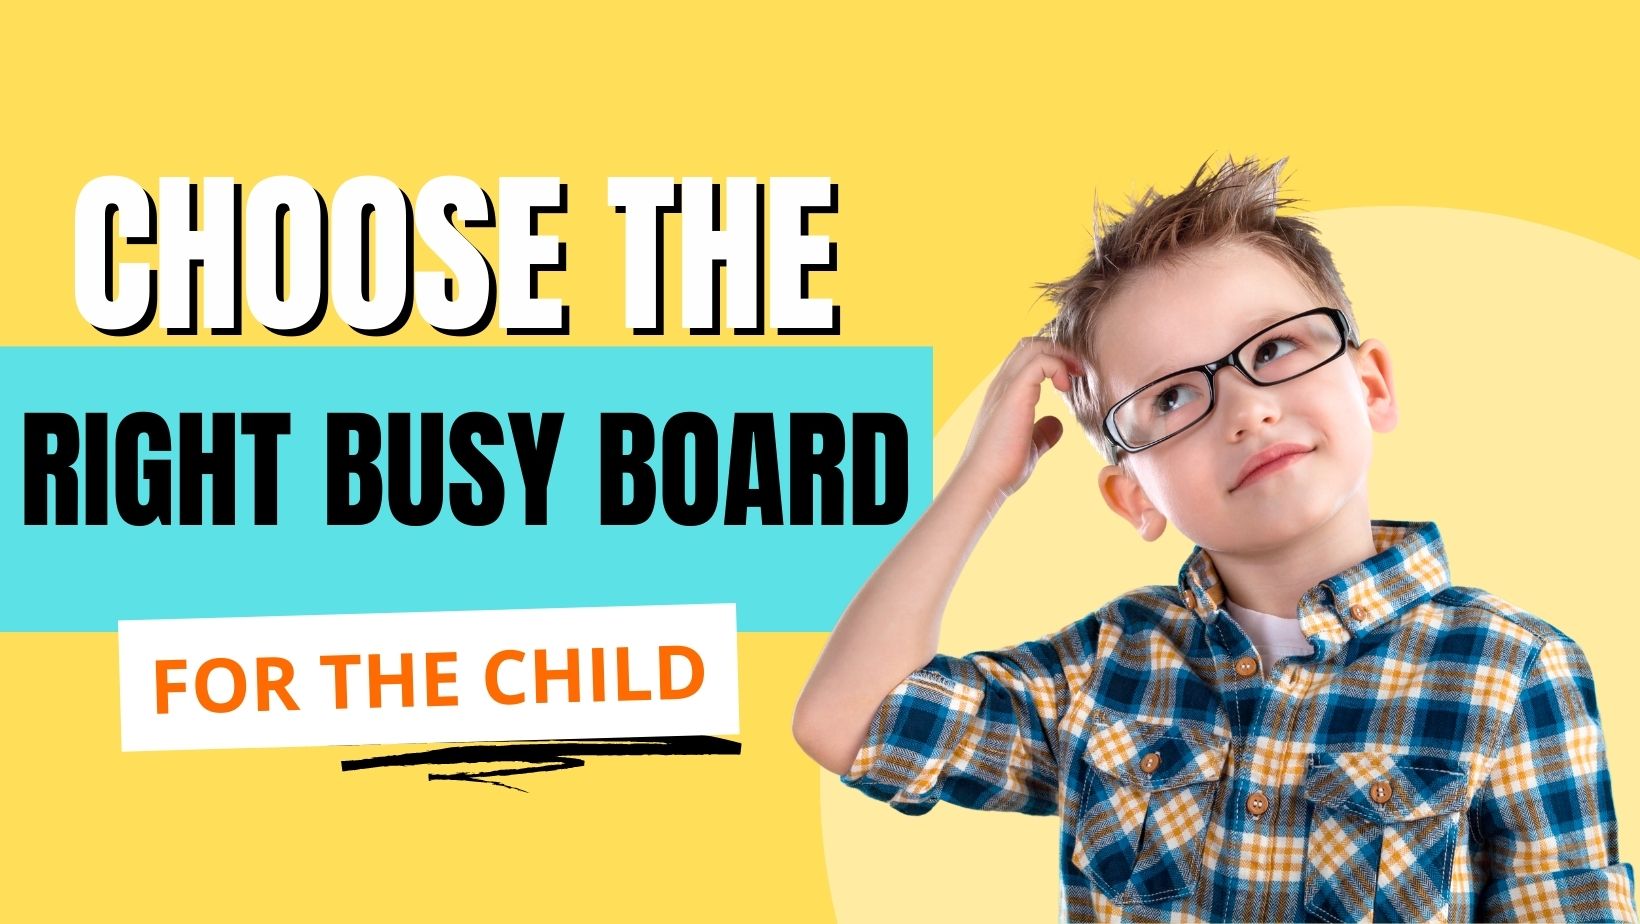 Choose the Right Busy Board for the Child